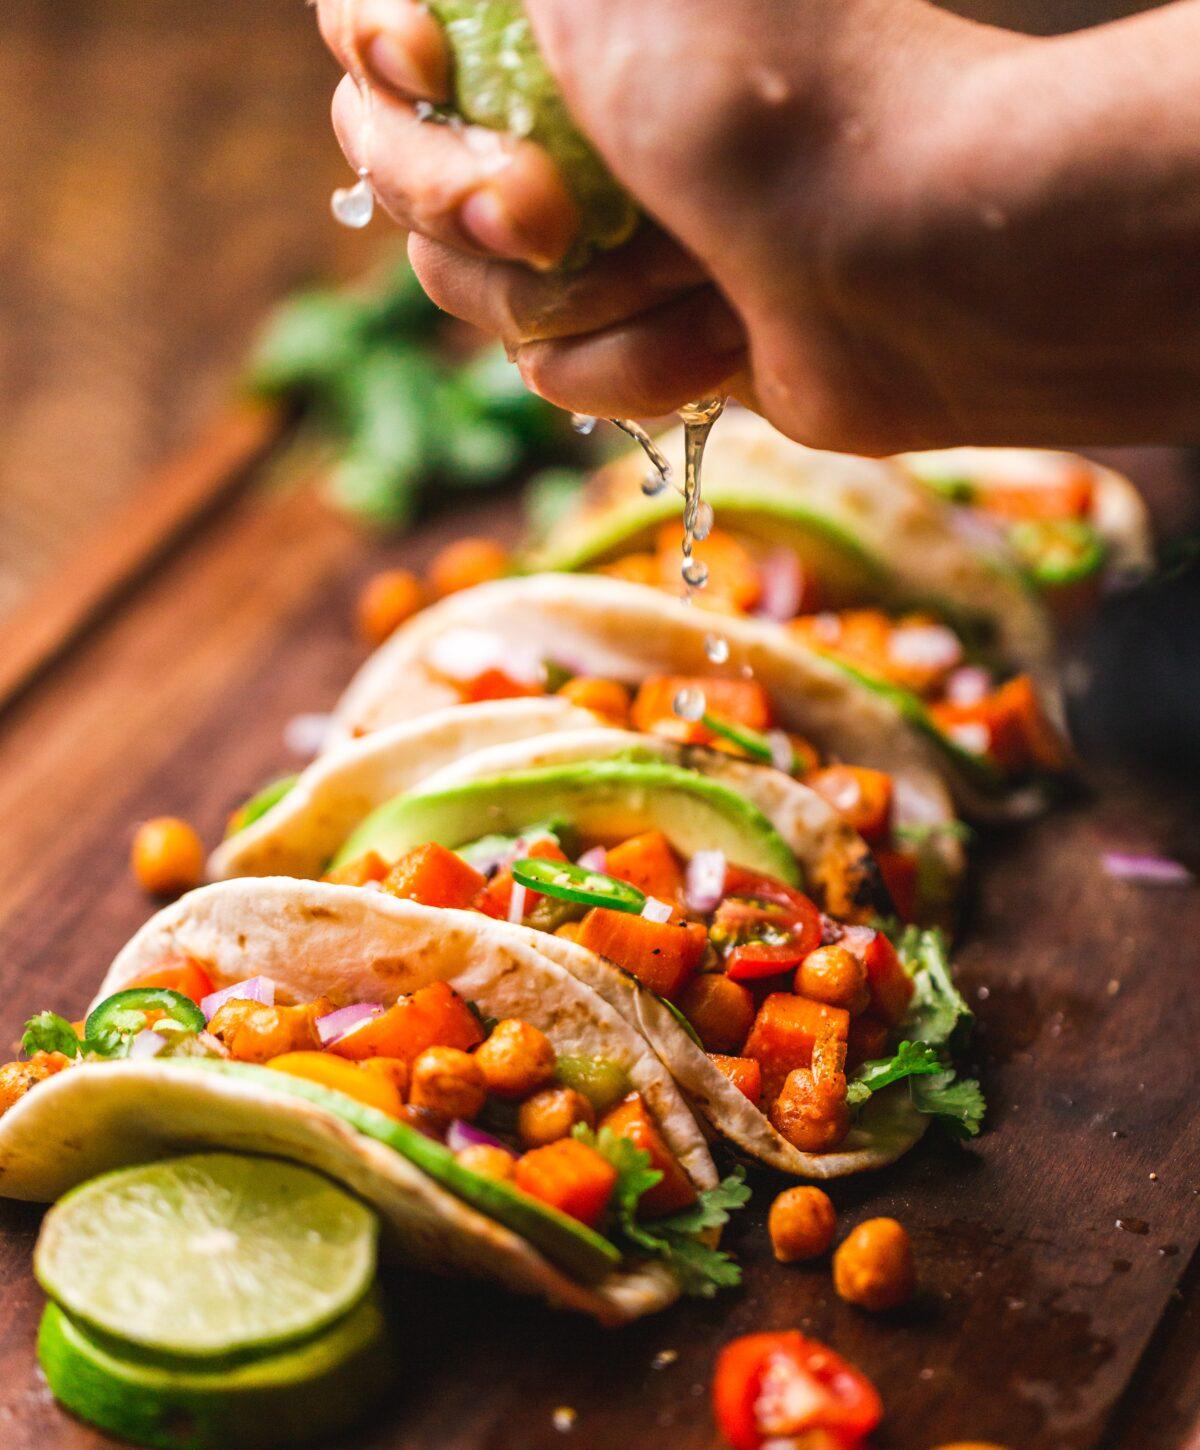 From simple tacos to upscale dining, Mexico City has much to offer. (Chad Montano/Unsplash)